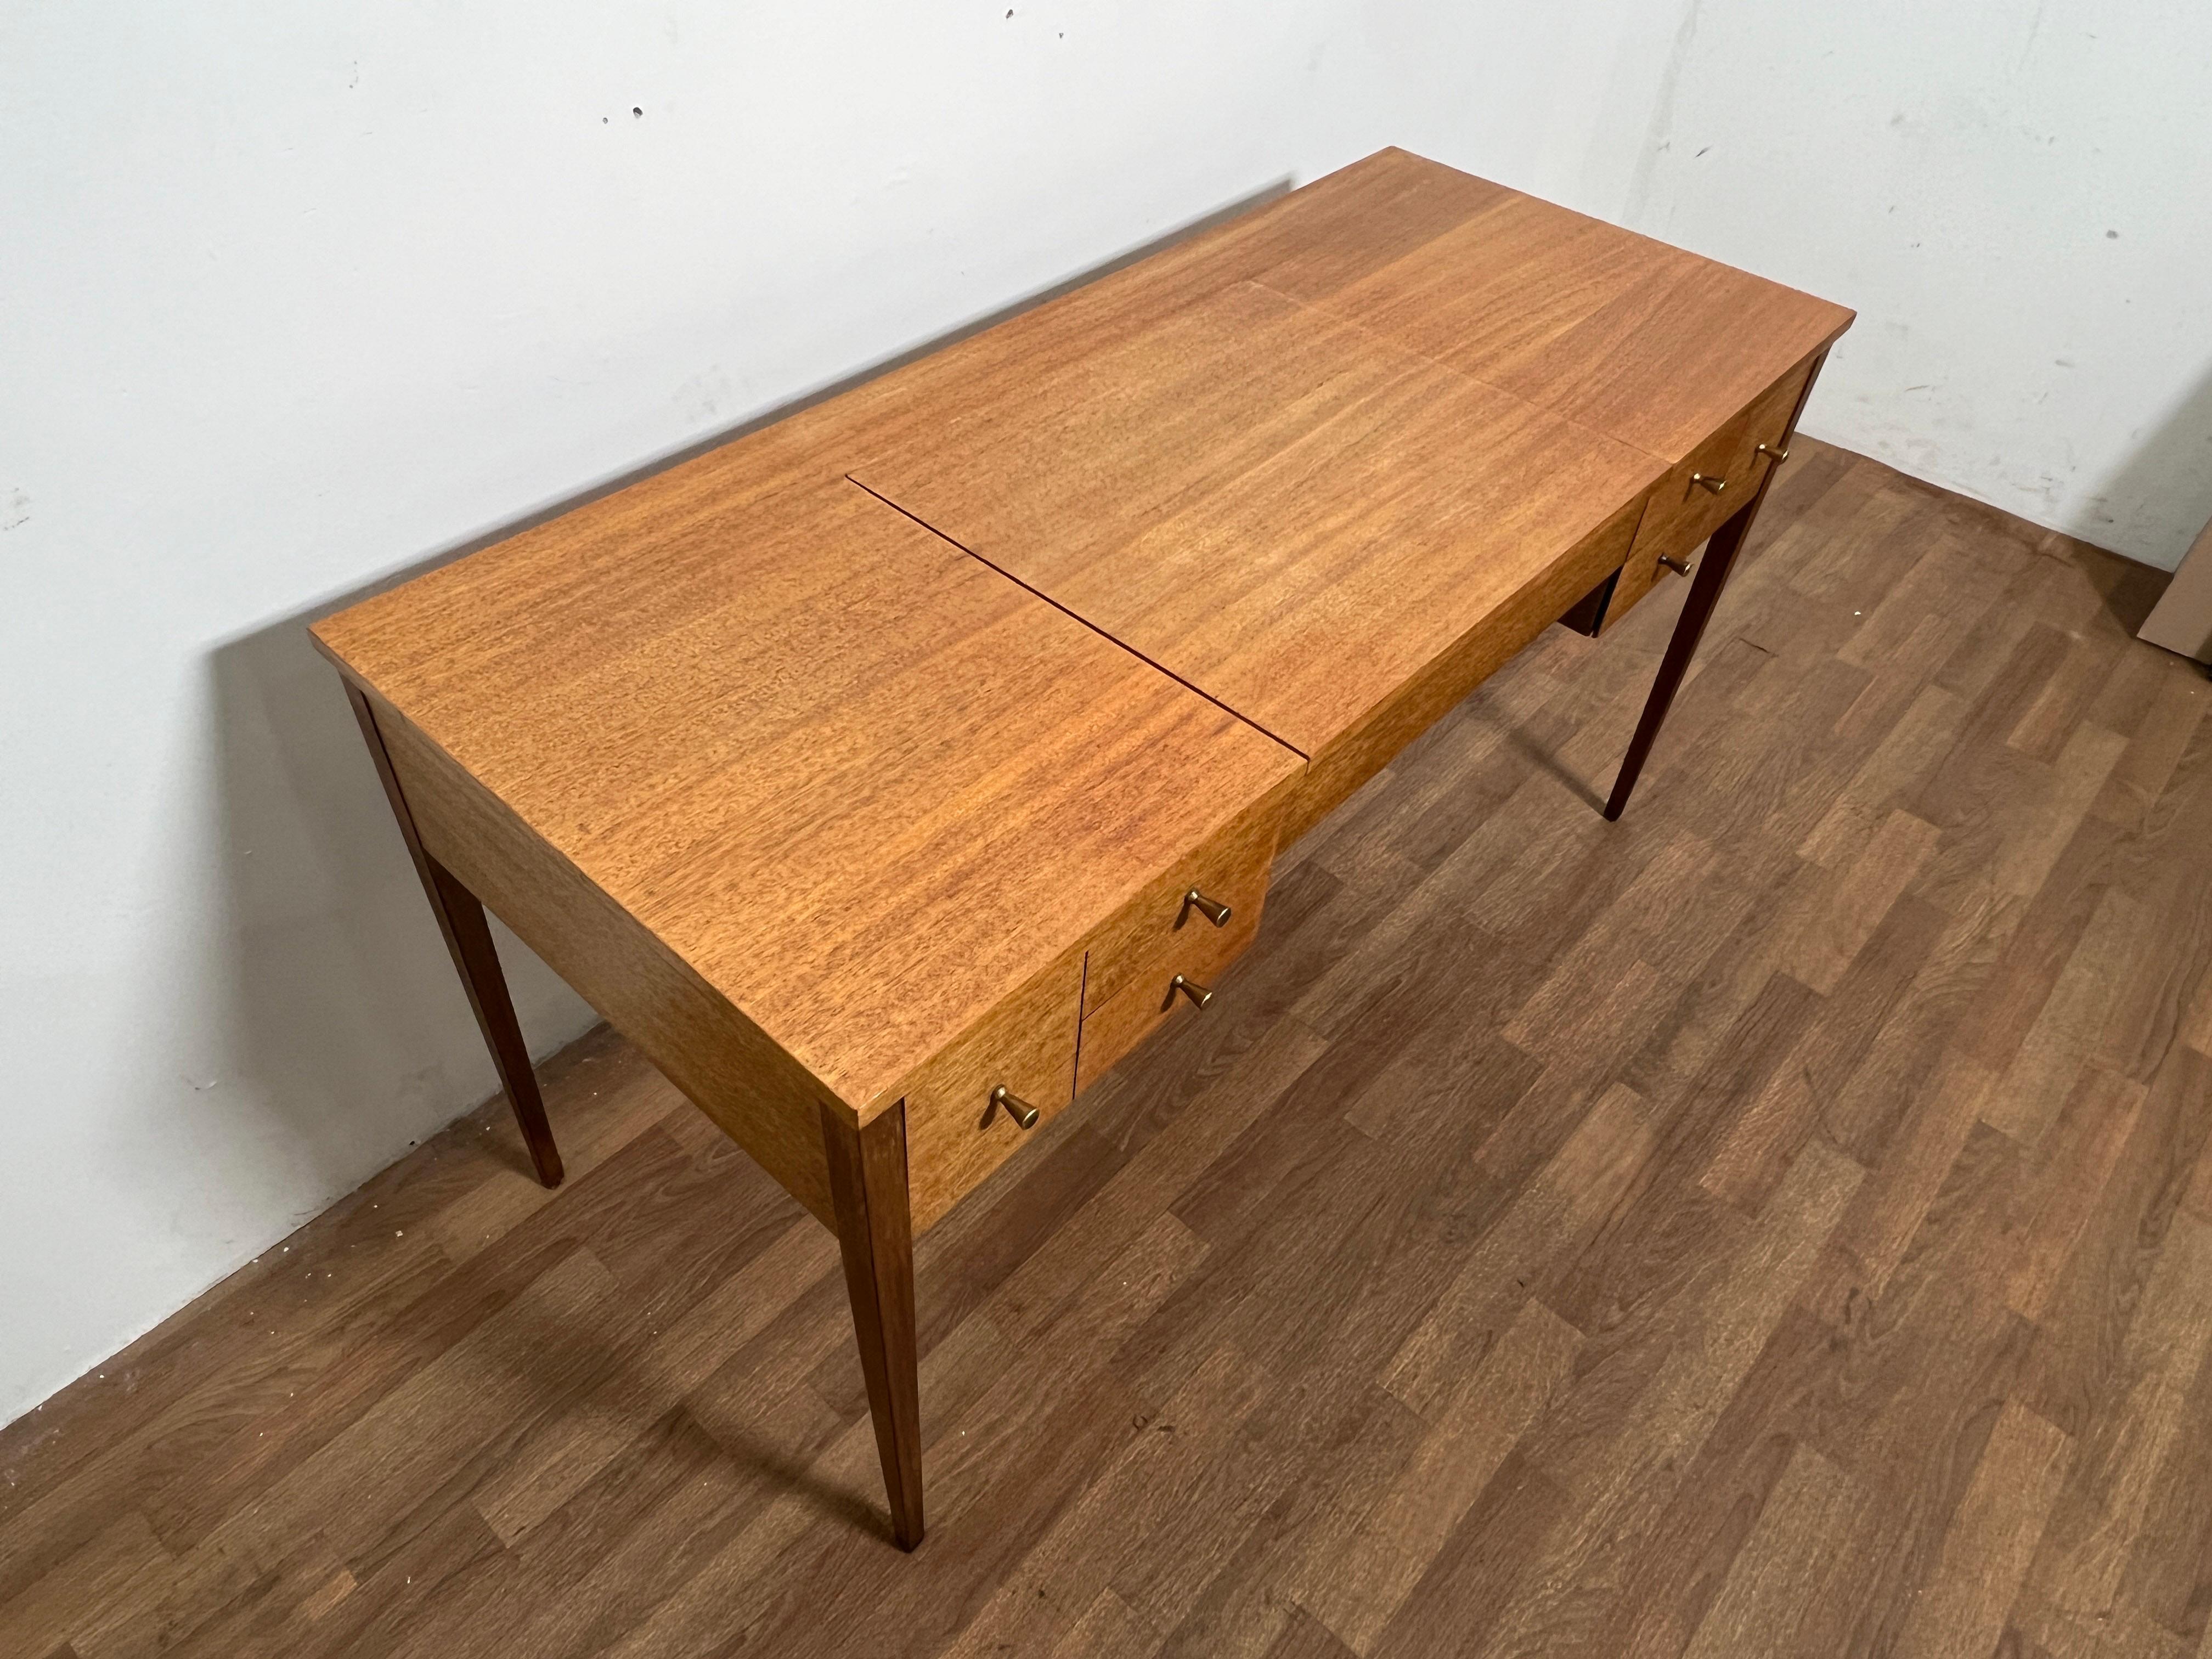 A mid-century modern vanity table in Honduran mahogany by Paul McCobb, for Calvin Furniture, Irwin Collection, circa late 1950s.